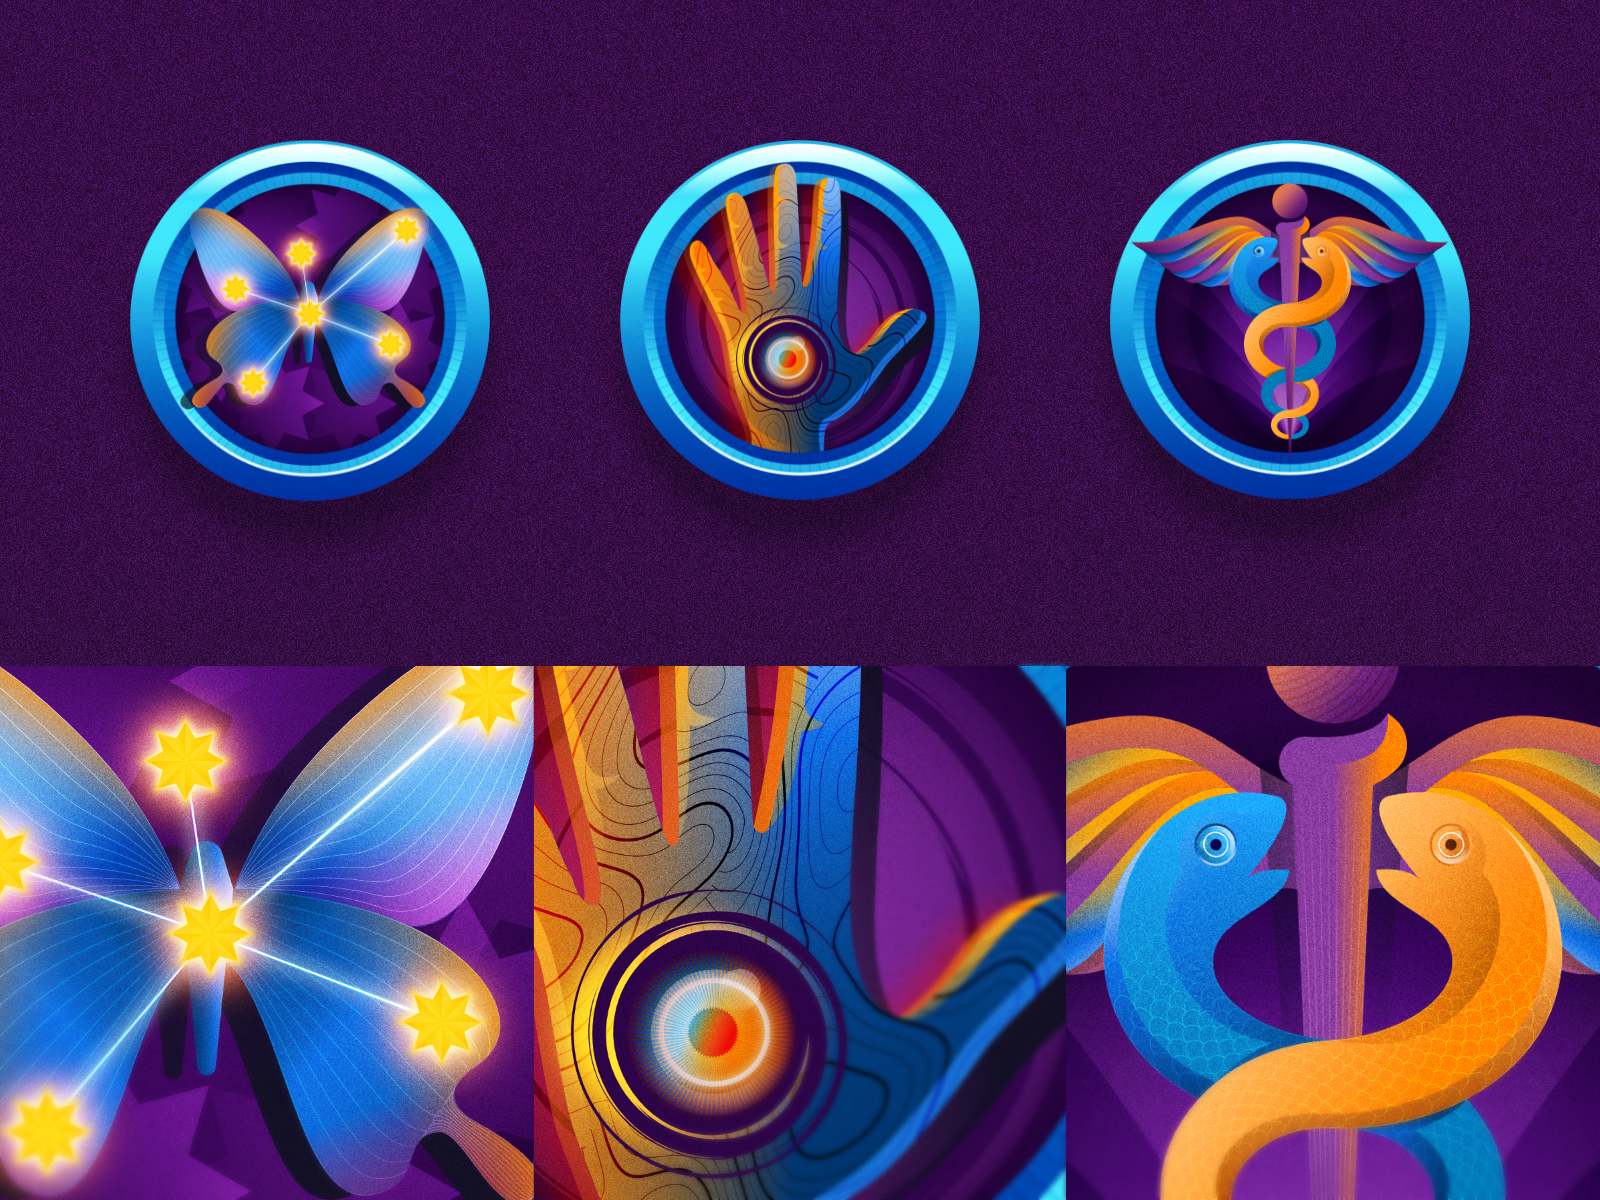 Mystic achievement icons. Heavenly Geometry, Sorcerer and Healer achievement affinity designer butterfly icon caduceus dark gamification graphic design healer icons illustration mystic sorcerer hand textured icons vector